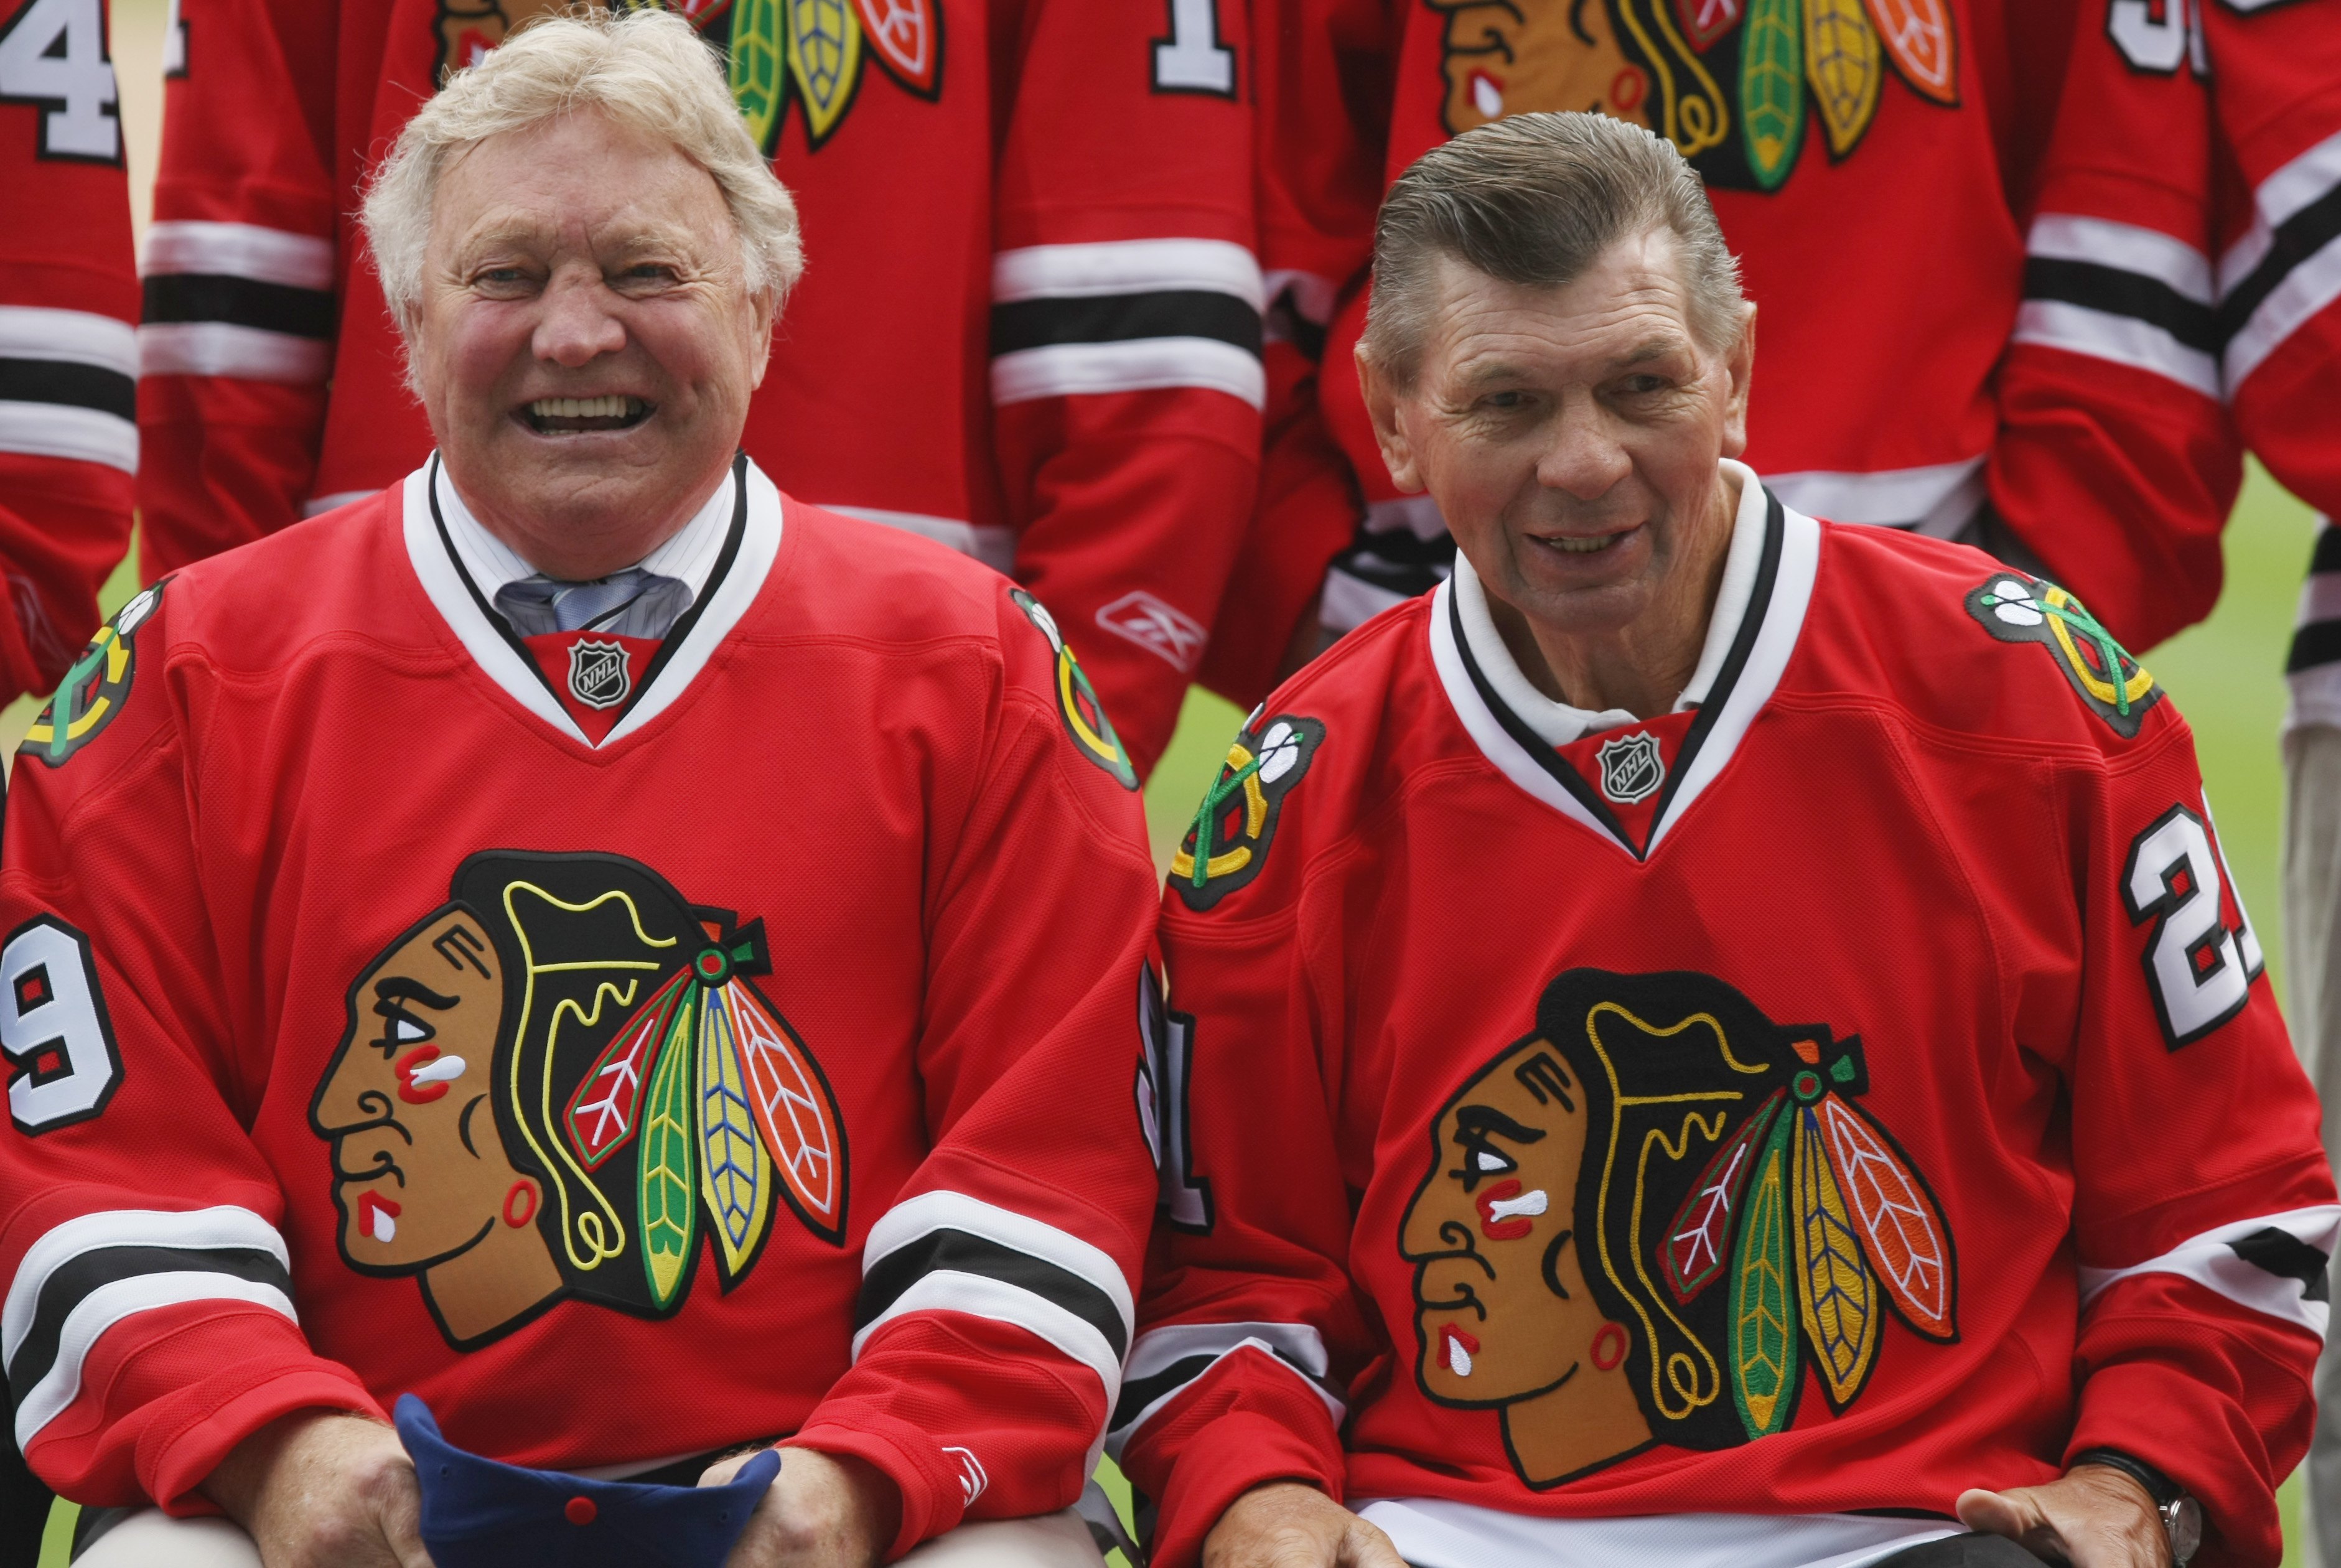 CHICAGO - JULY 22: Former Chicago Blackhawk players Bobby Hull and Stan Mikita look on during the NHL Winter Classic 2009 press conference on July  22, 2008 at Wrigley Field in Chicago, Illinois. (Photo by Jonathan Daniel/Getty Images for the NHL)